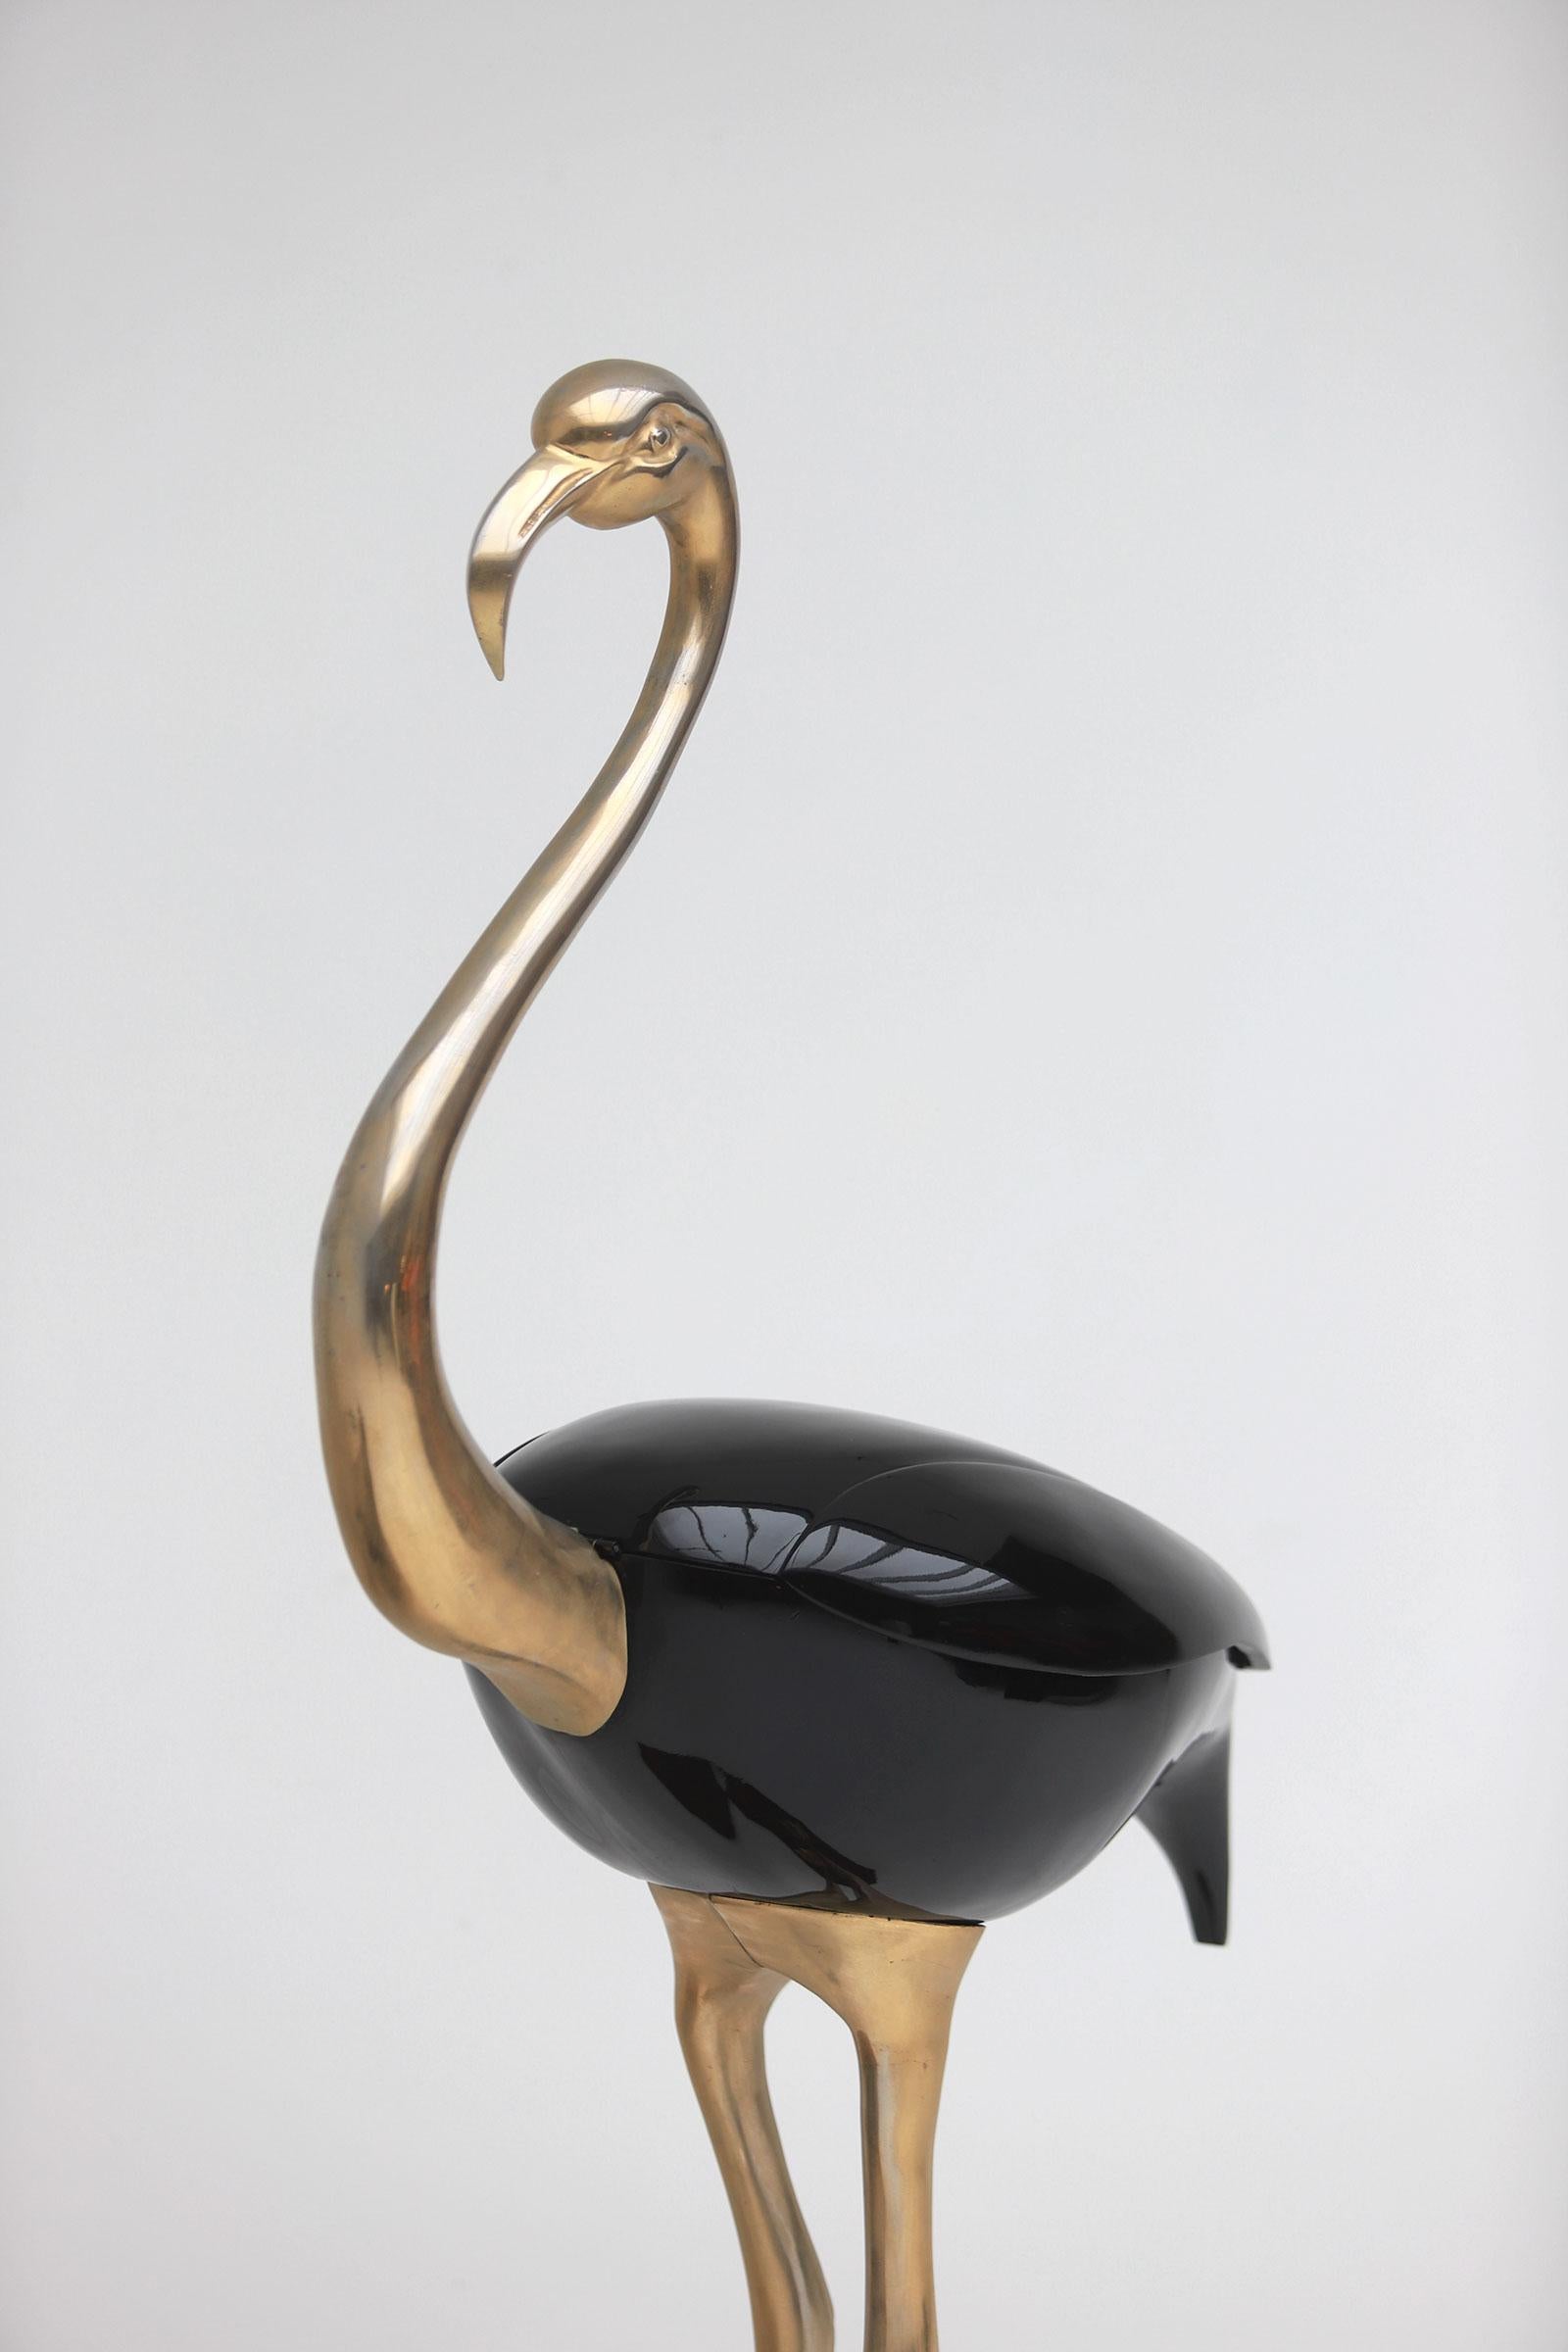 Lifesize Brass Flamingo with storage compartment by Fondica 1970s For Sale 5